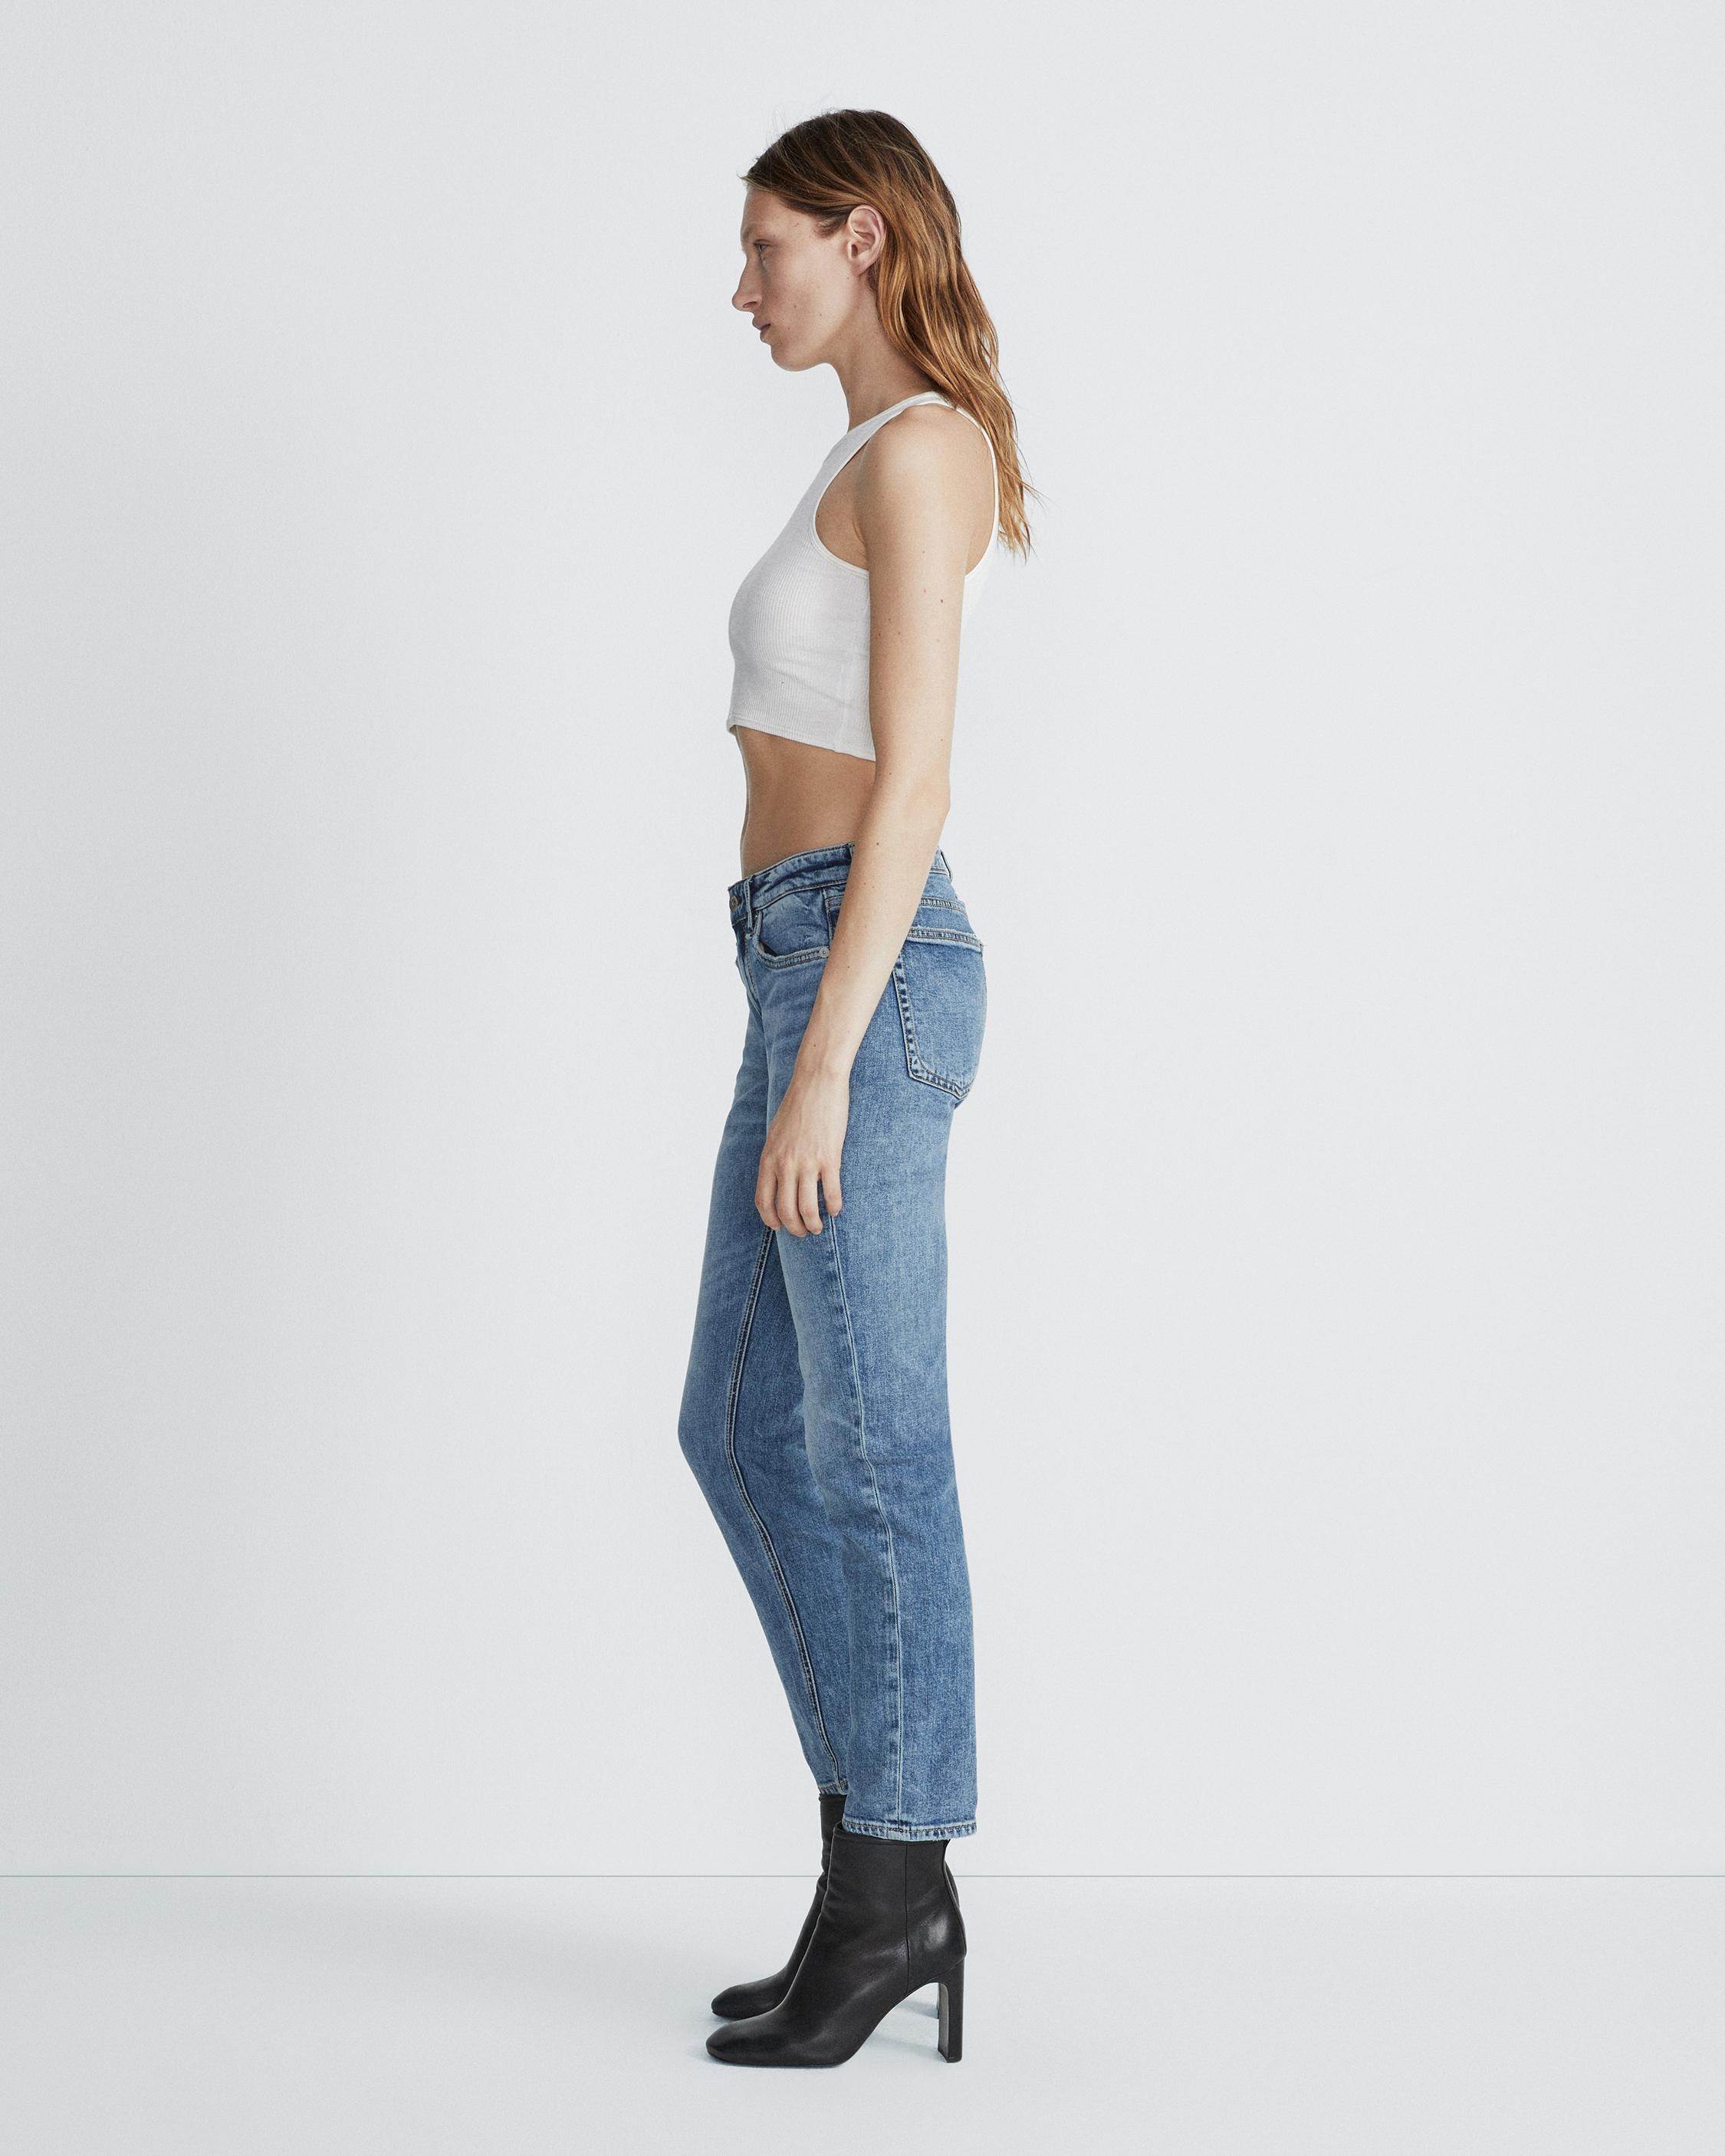 Harlow Straight - Lou: Mid-Rise Vintage Stretch Jean